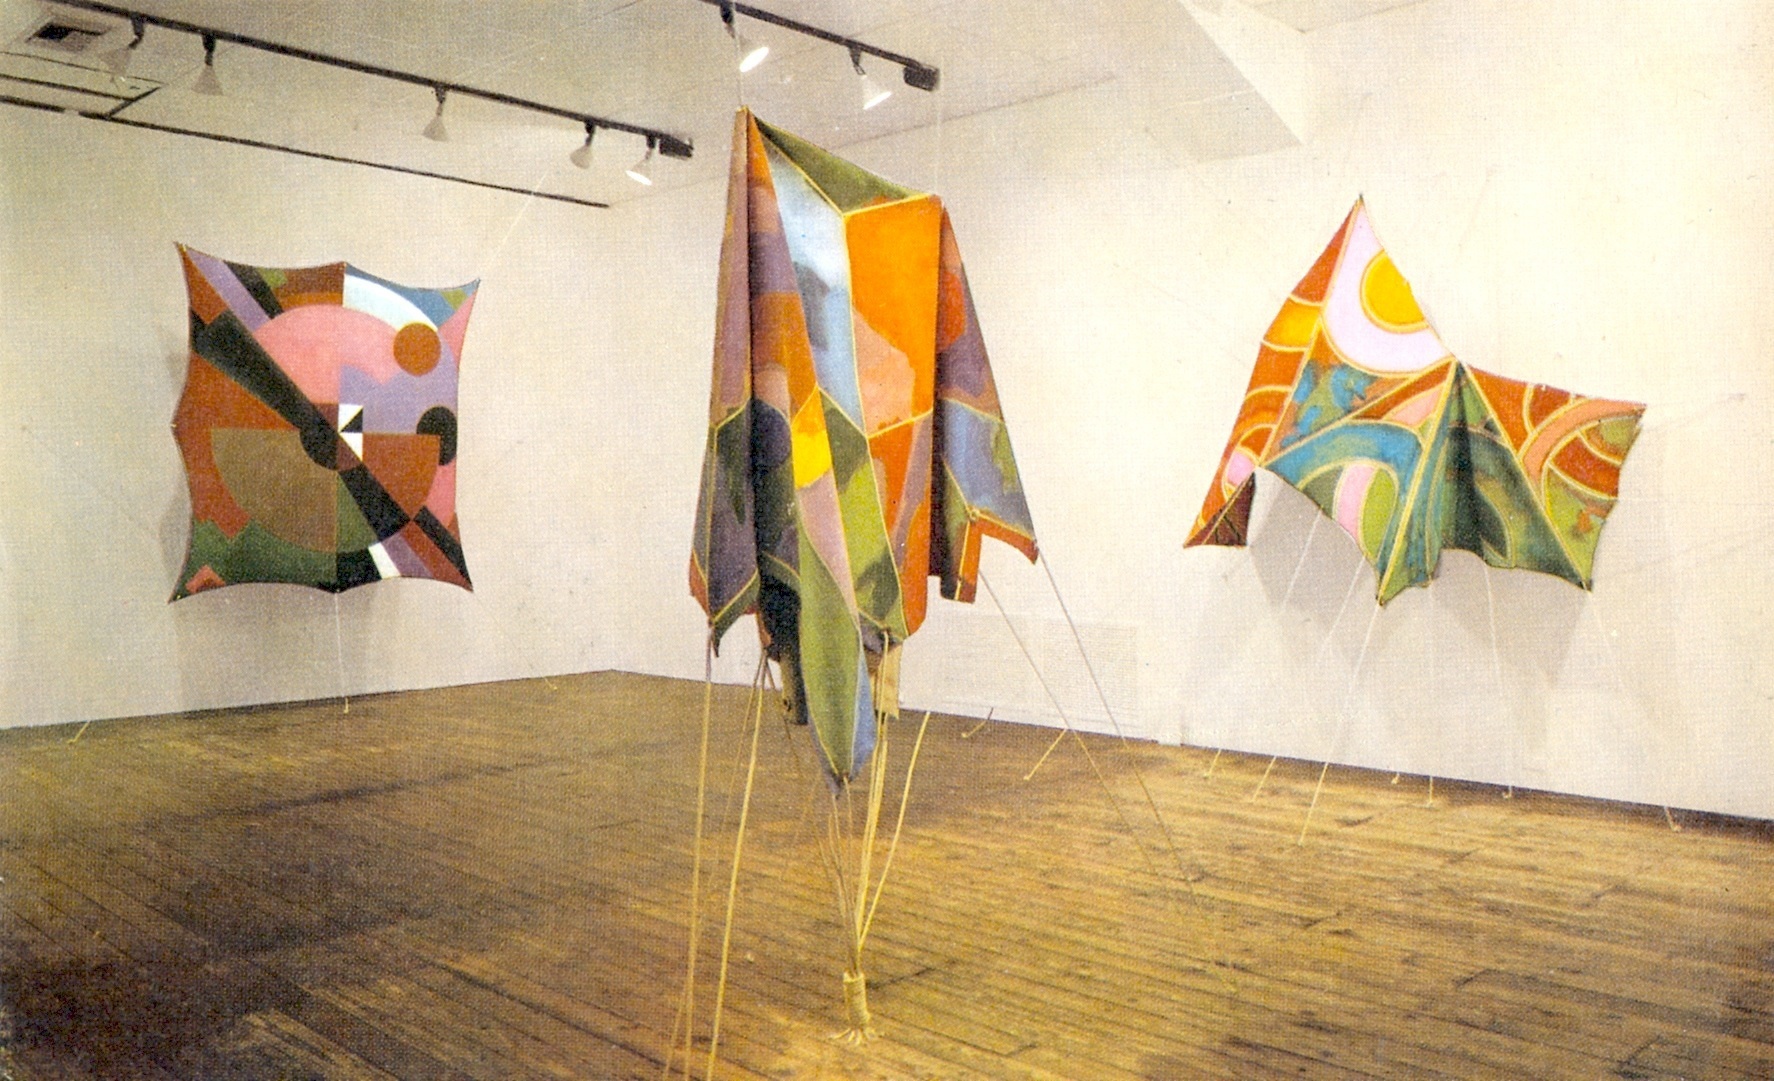 Paintings from the Joe Overstreet exhibition in Houston, Texas, 1972